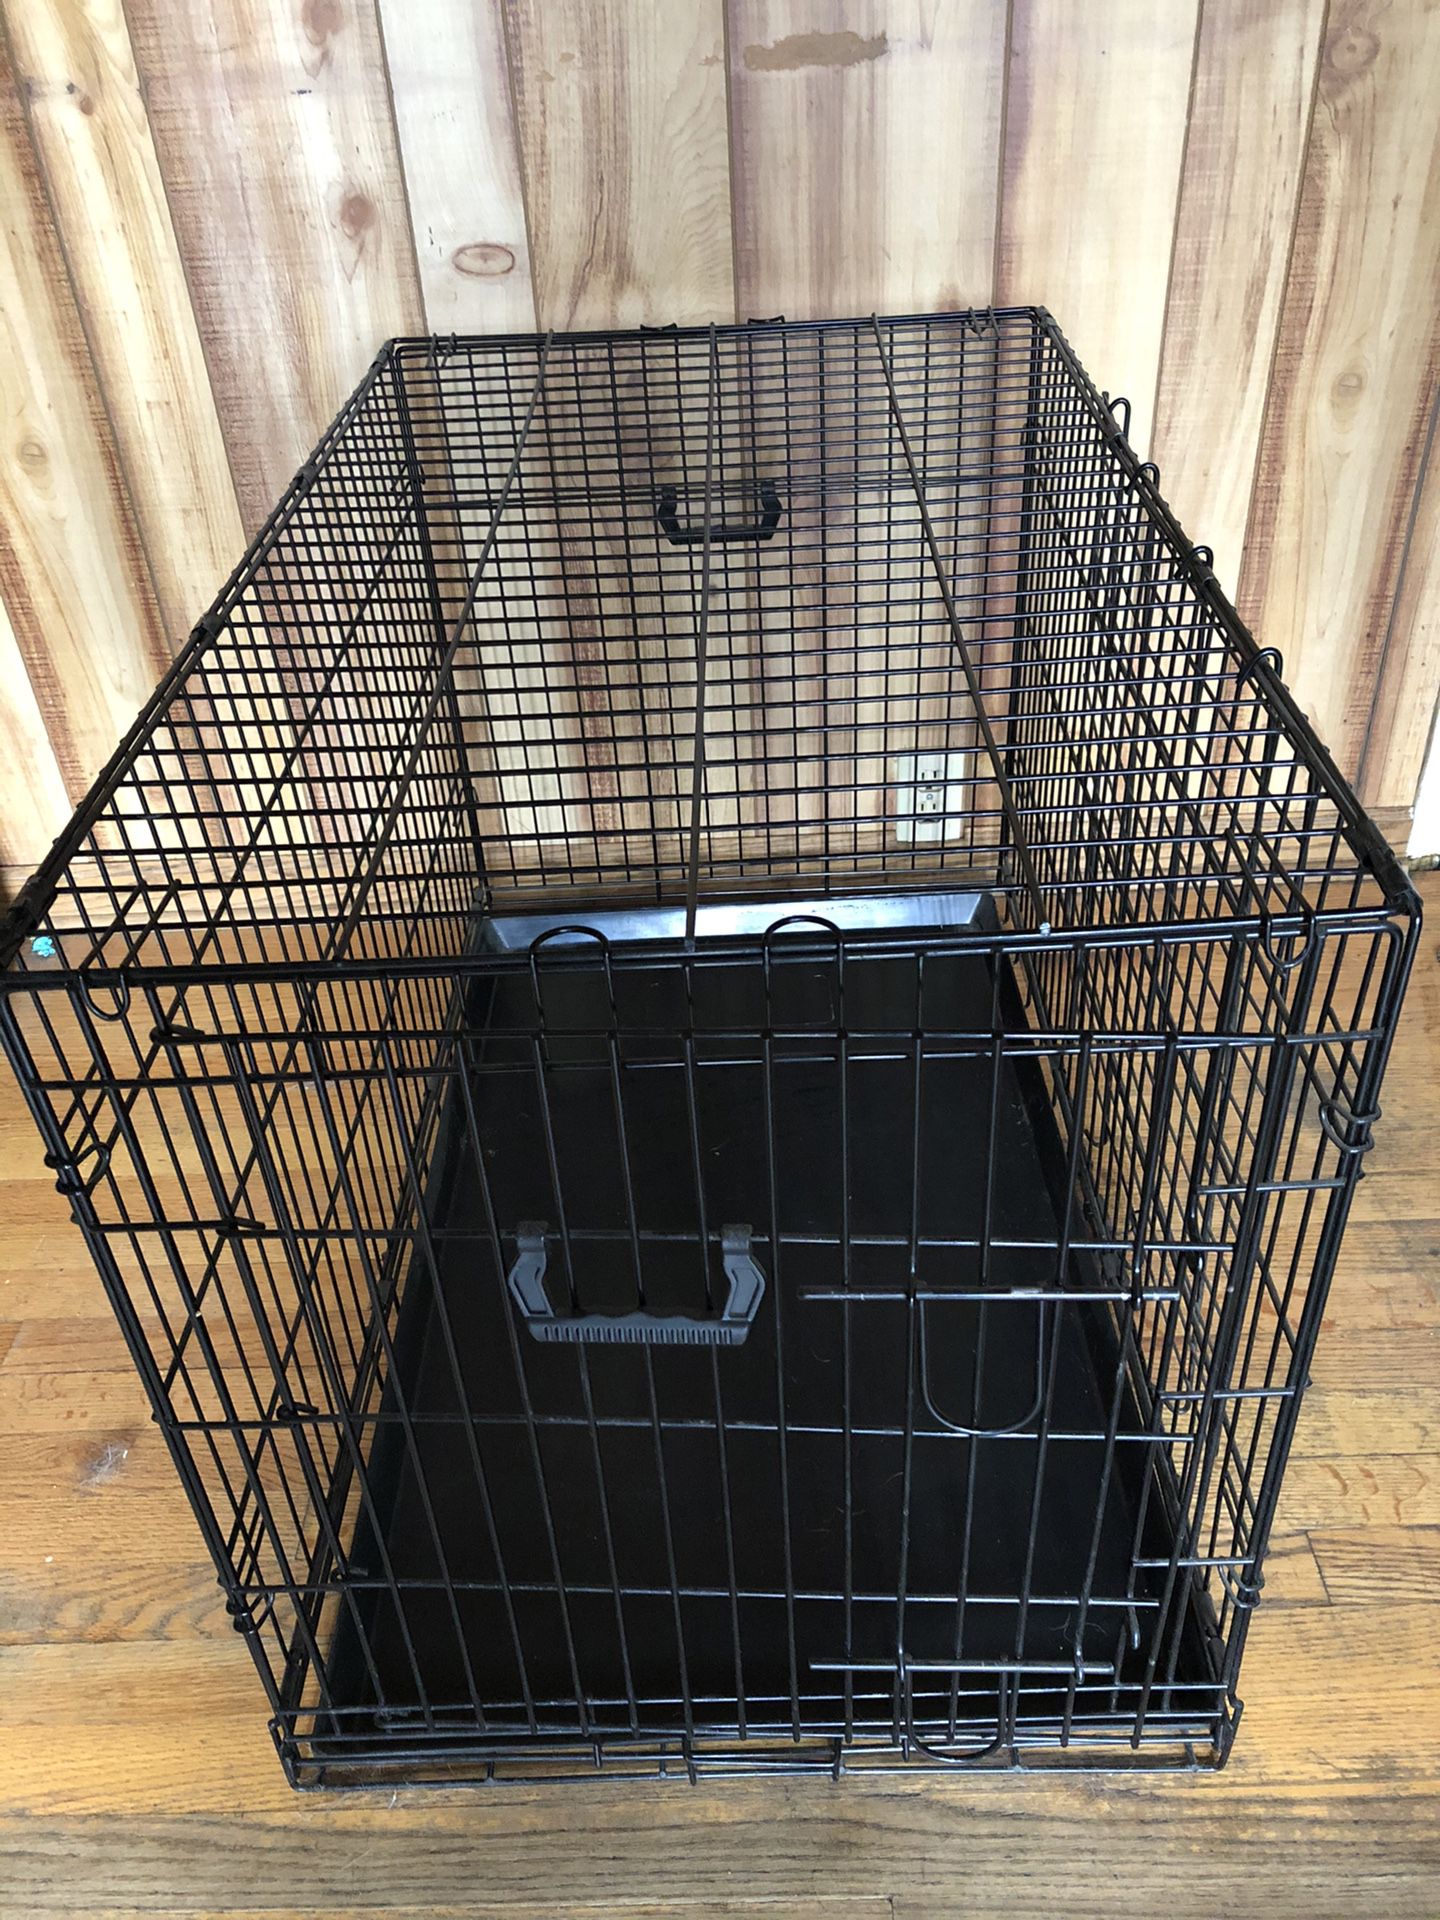 Medium dog crate 3ft lg x 22 in w x 2ft h